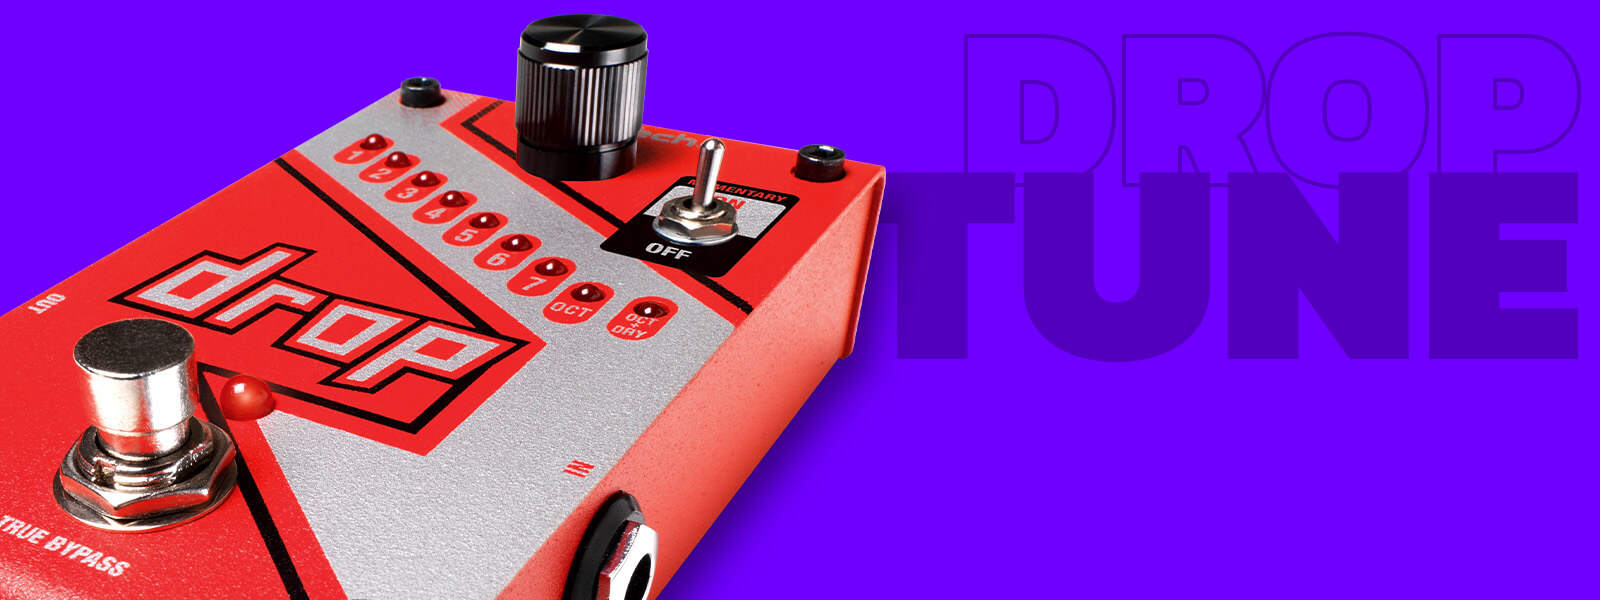 DigiTech Drop polyphonic drop tune guitar pedal in red with drop arrow graphics, purple background and graphics that says 